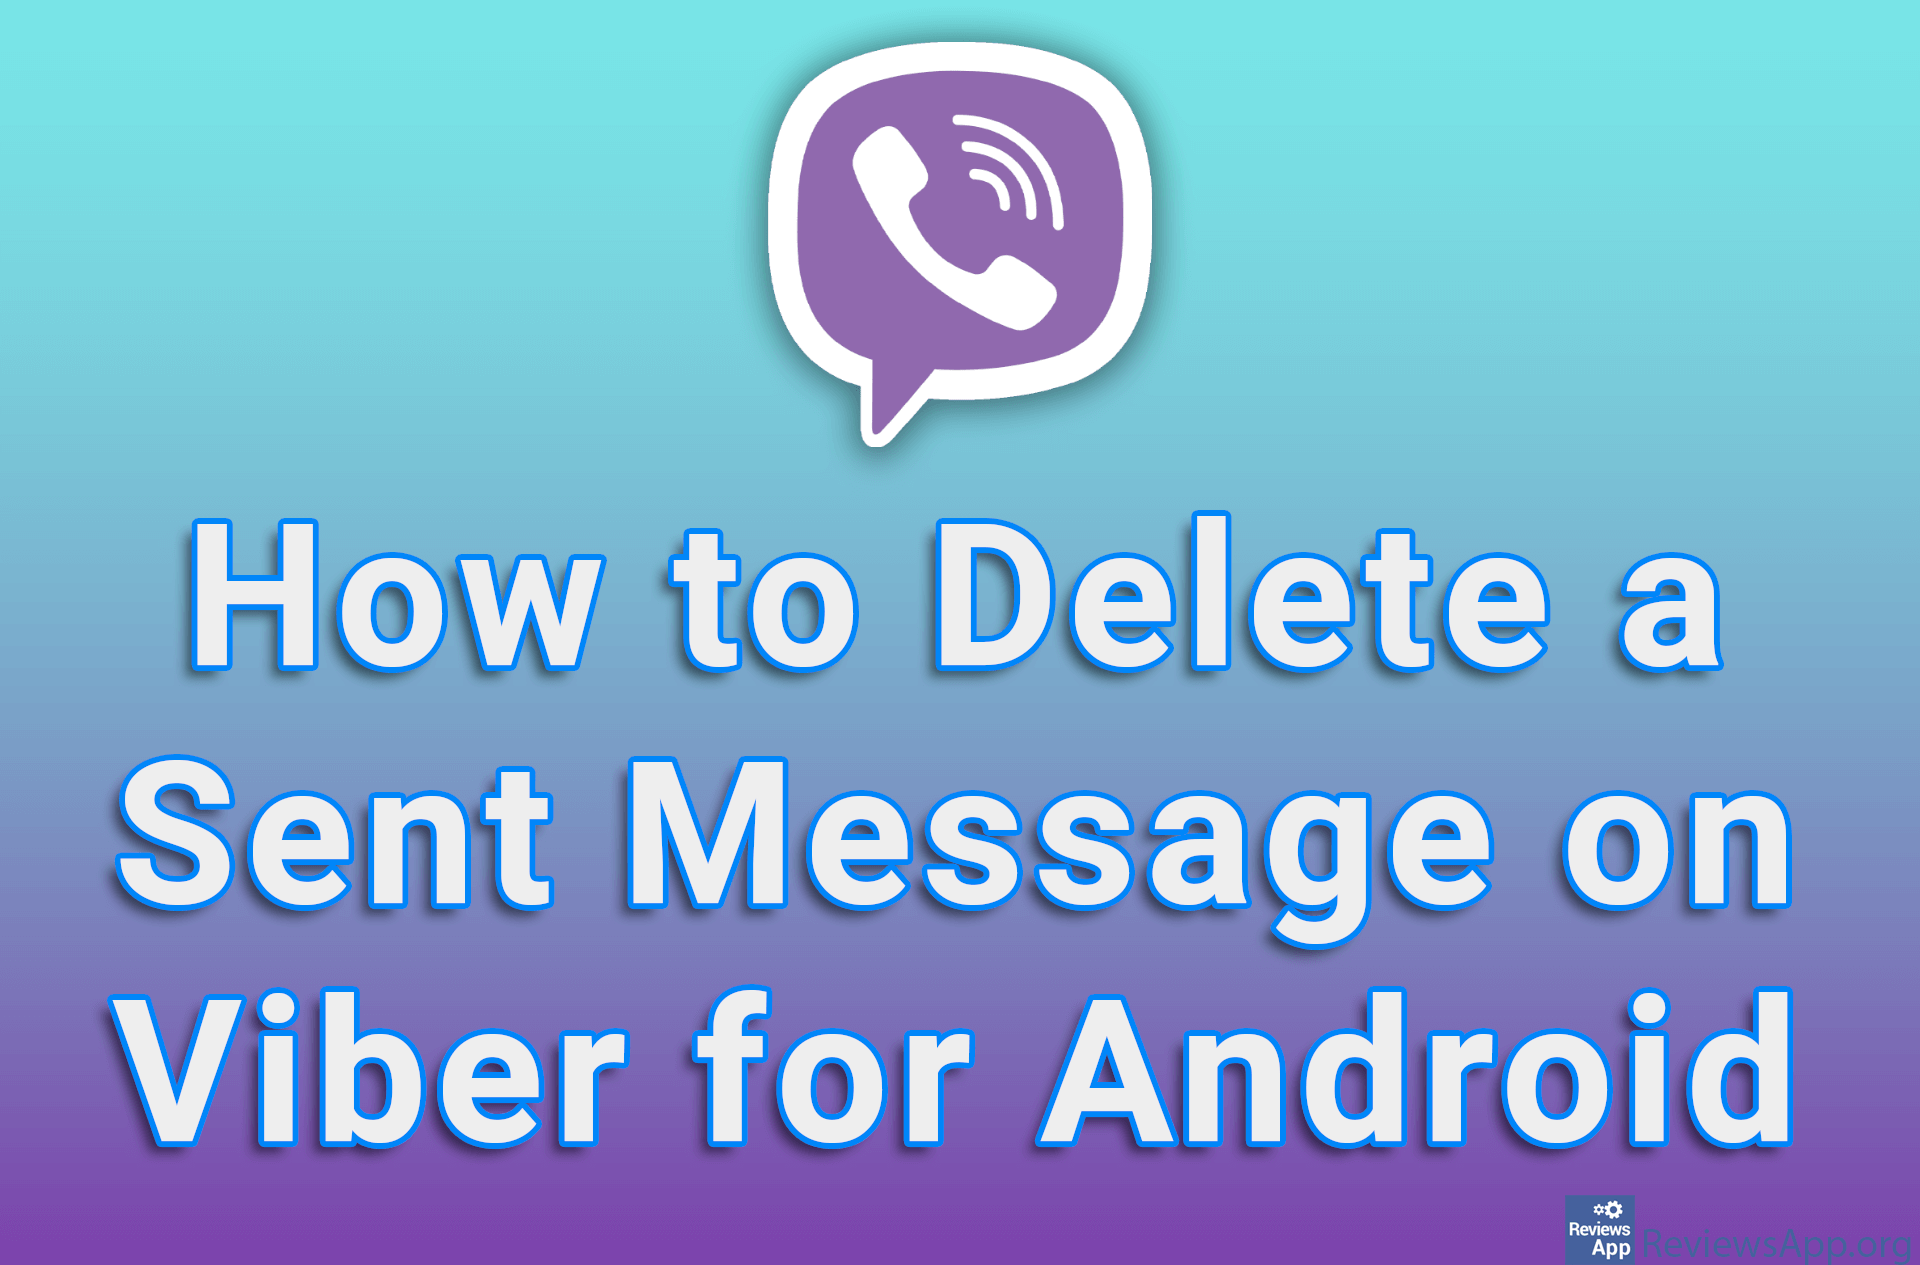 How to Delete a Sent Message on Viber for Android